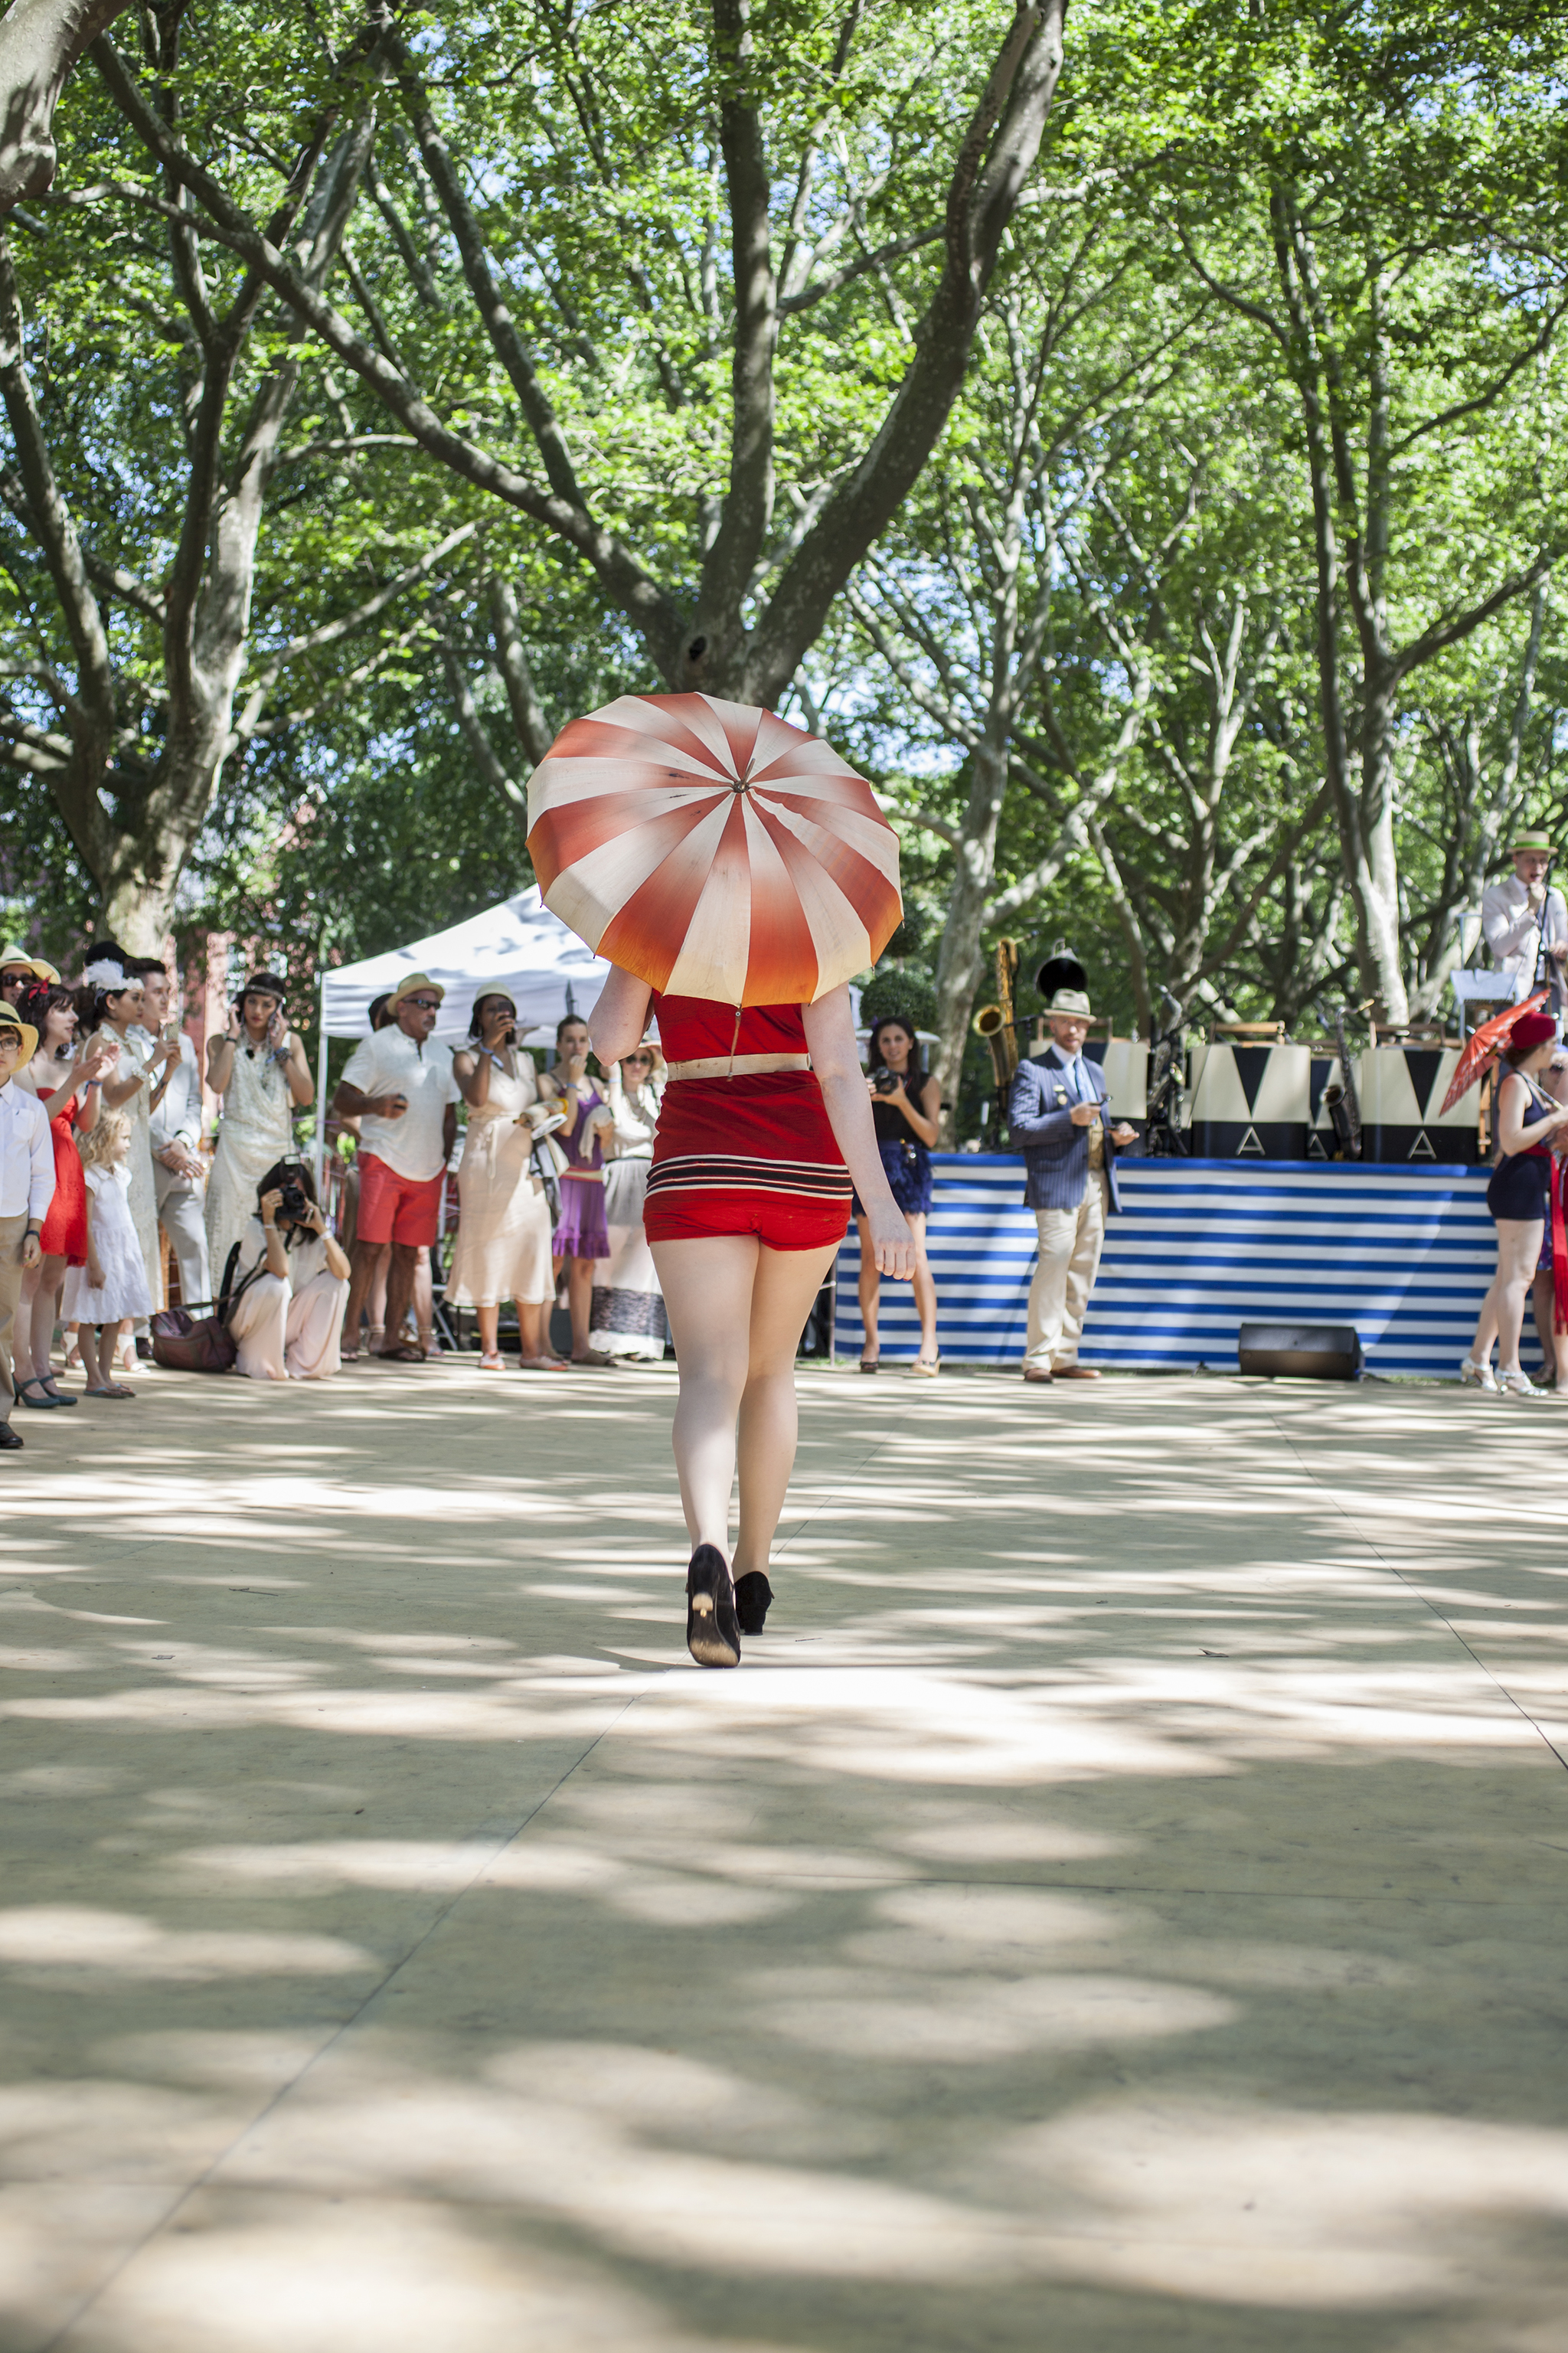 9th Annual Jazz Age Lawn Party